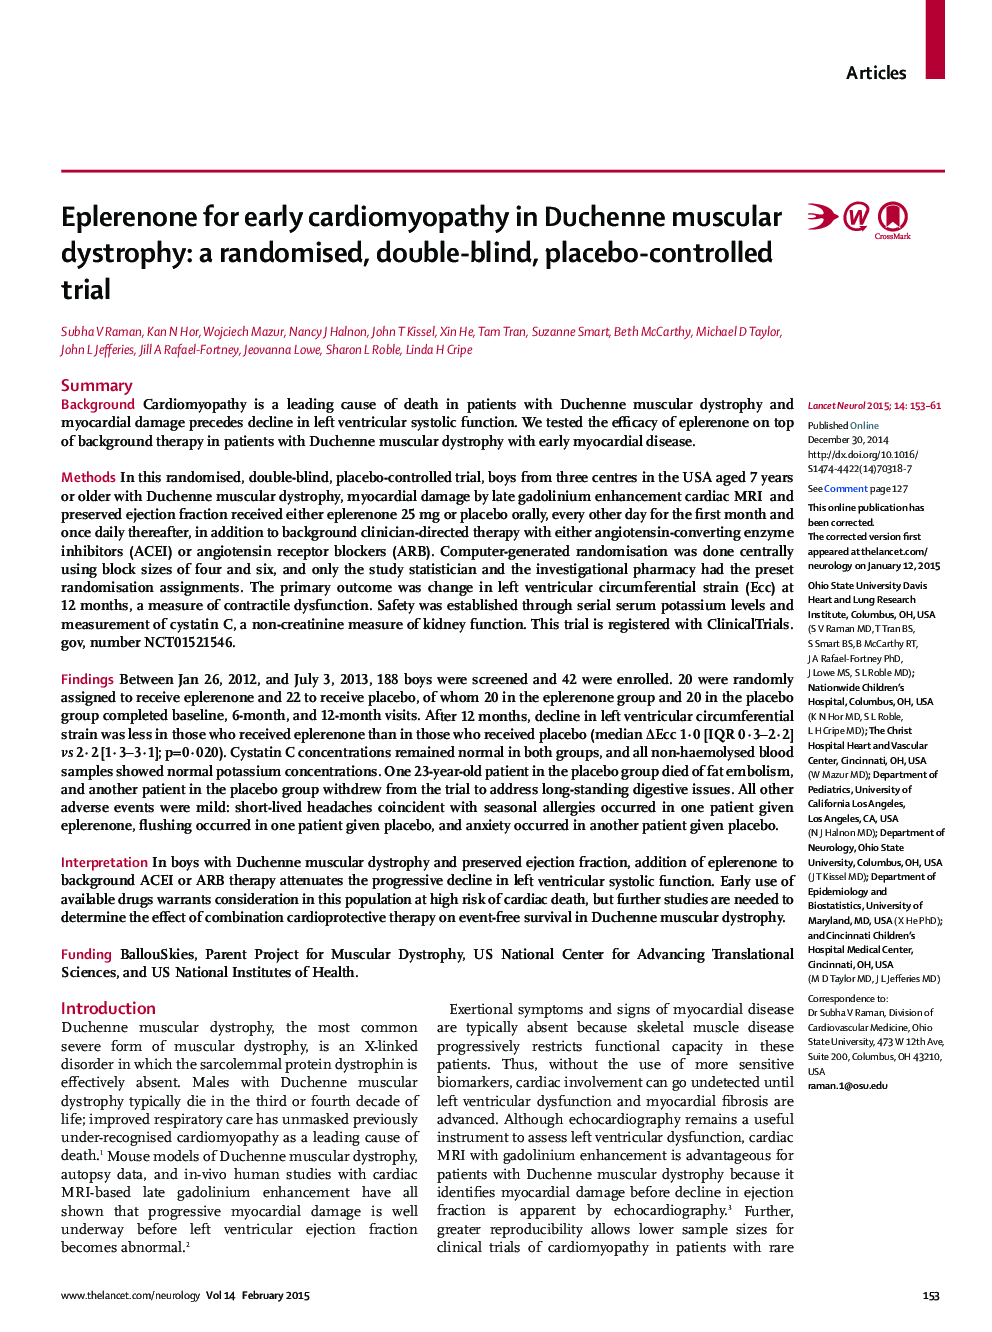 Eplerenone for early cardiomyopathy in Duchenne muscular dystrophy: a randomised, double-blind, placebo-controlled trial